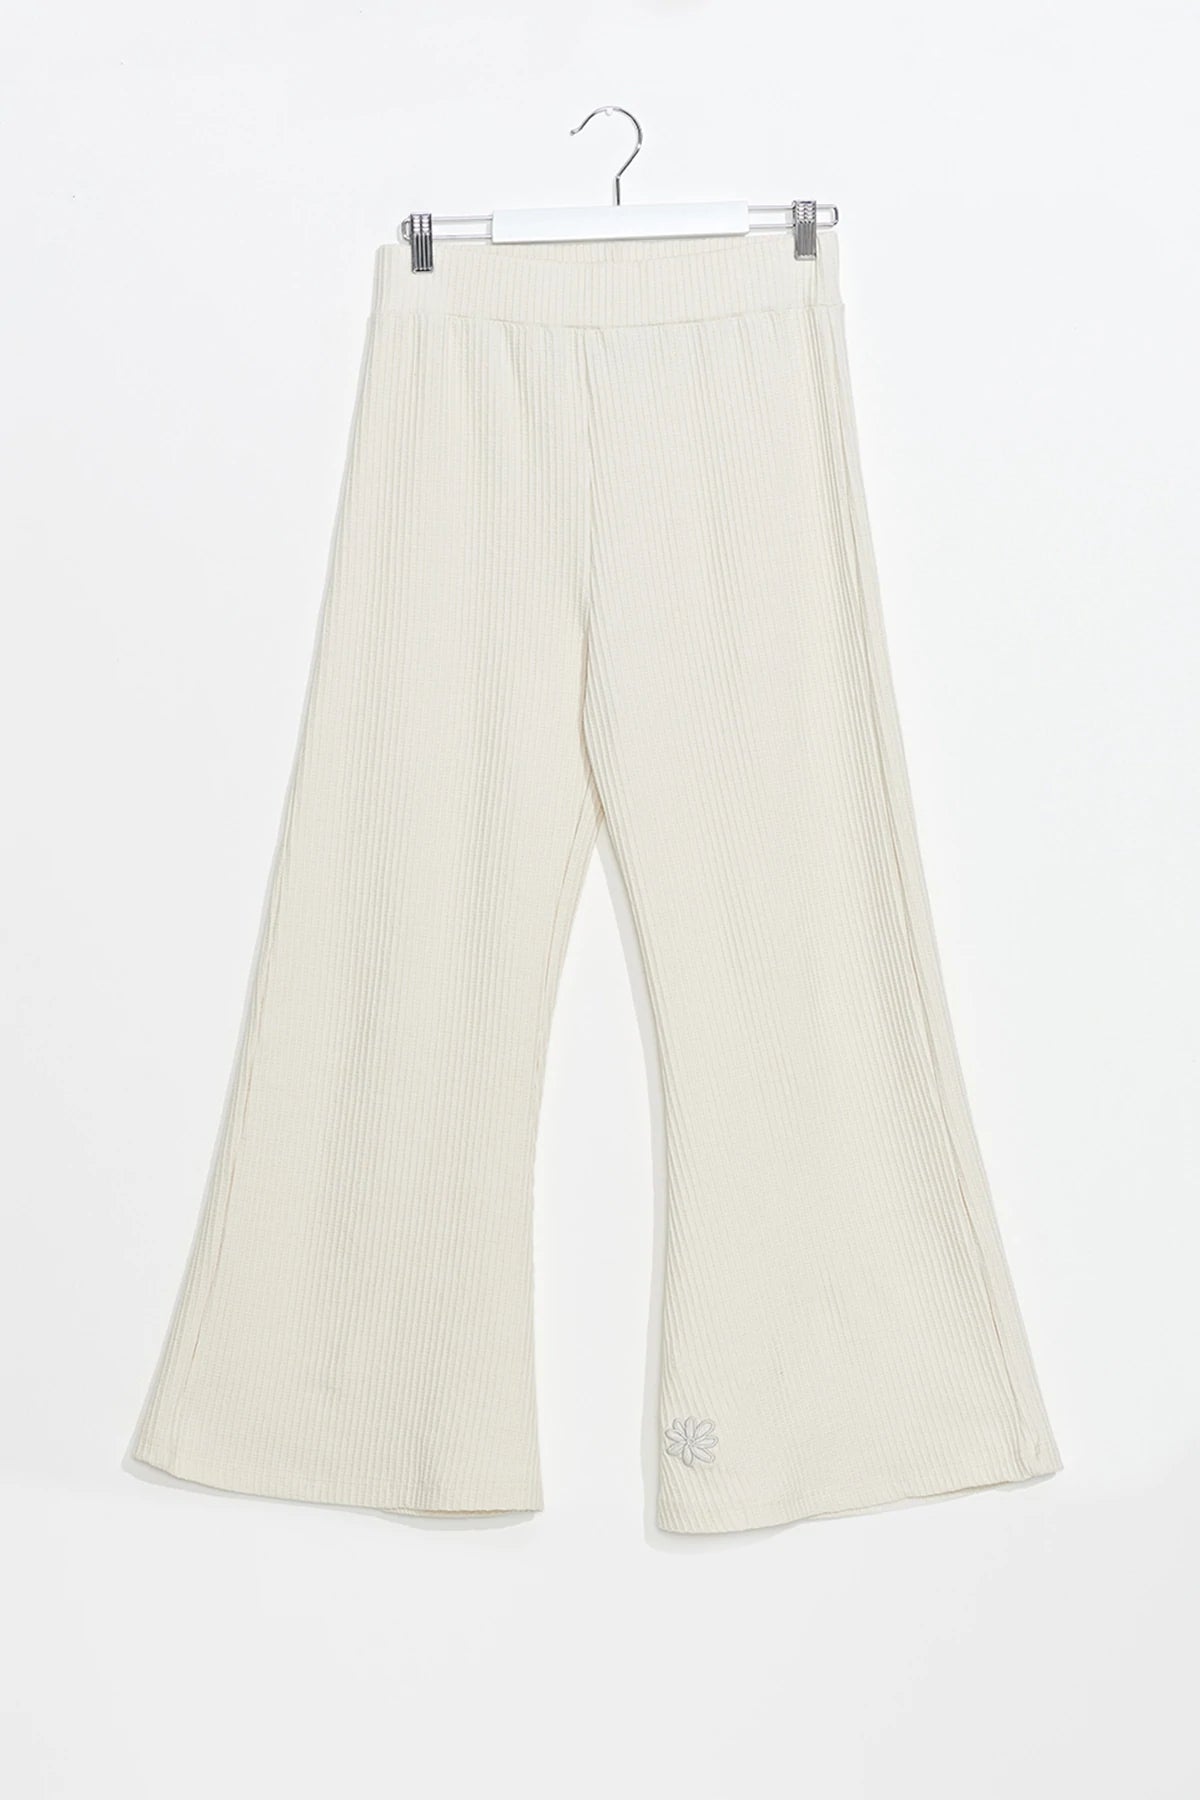 Young Alchemy Pant - Dirty White